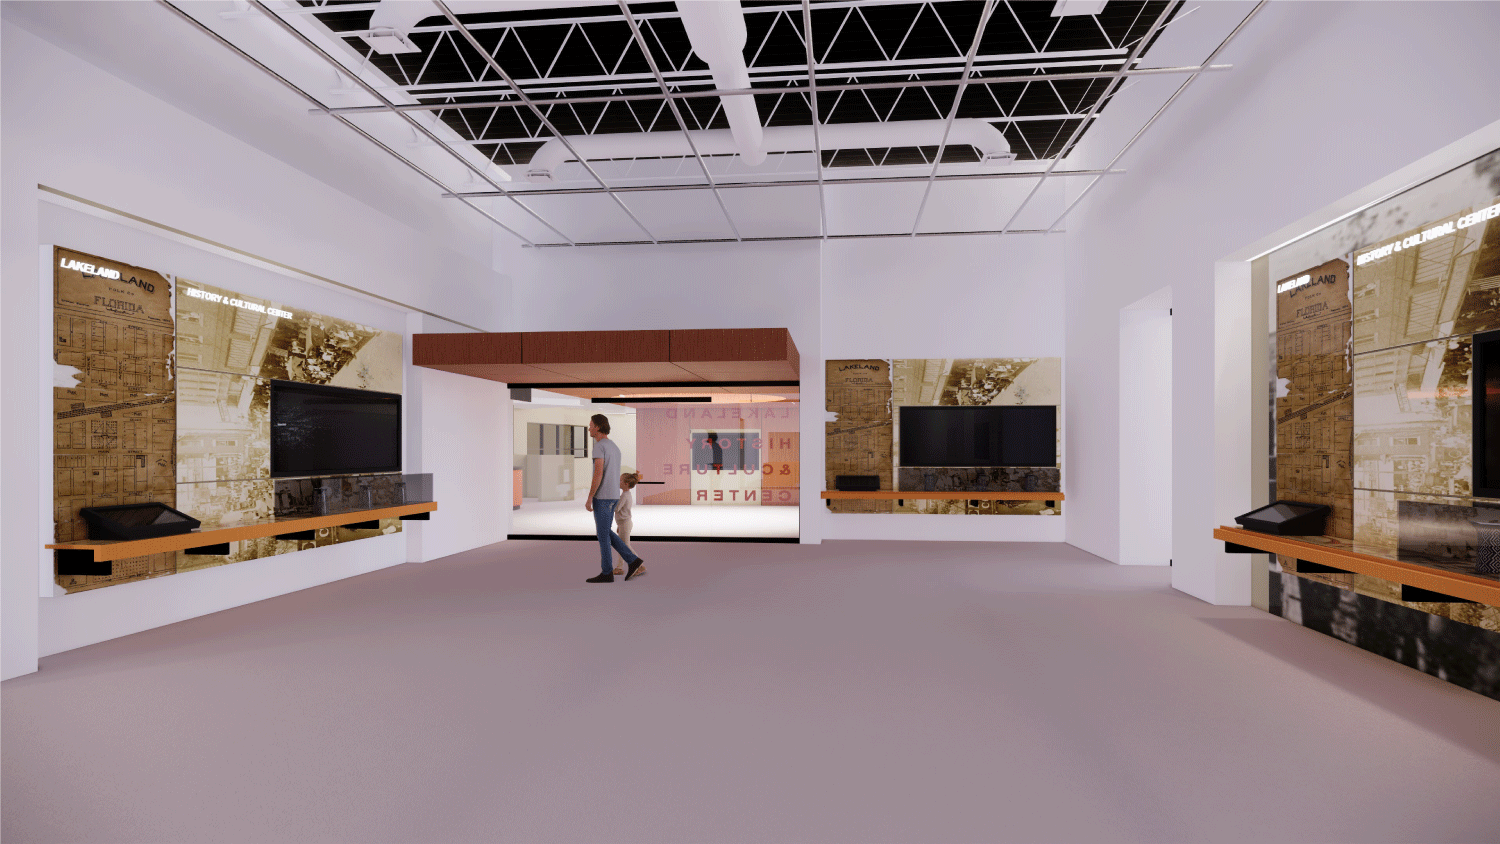 rendering inside lakeland history and culture center - open room with wall displays